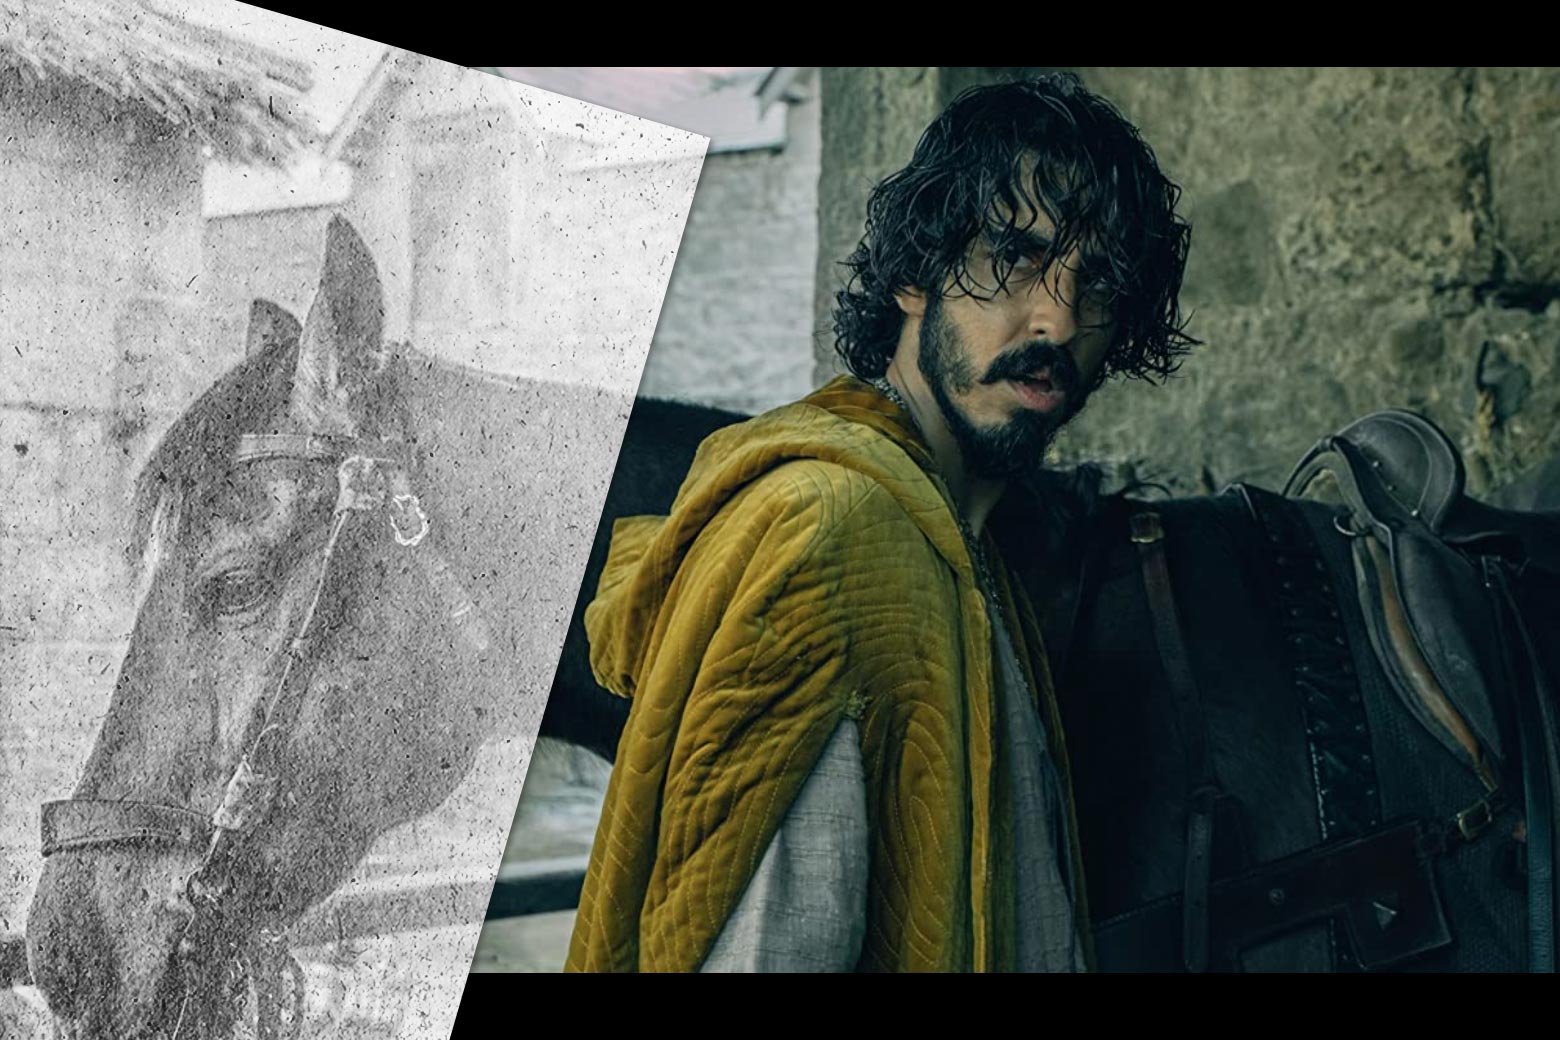 Dev Patel in The Green Knight, with the image of a sheet of paper.